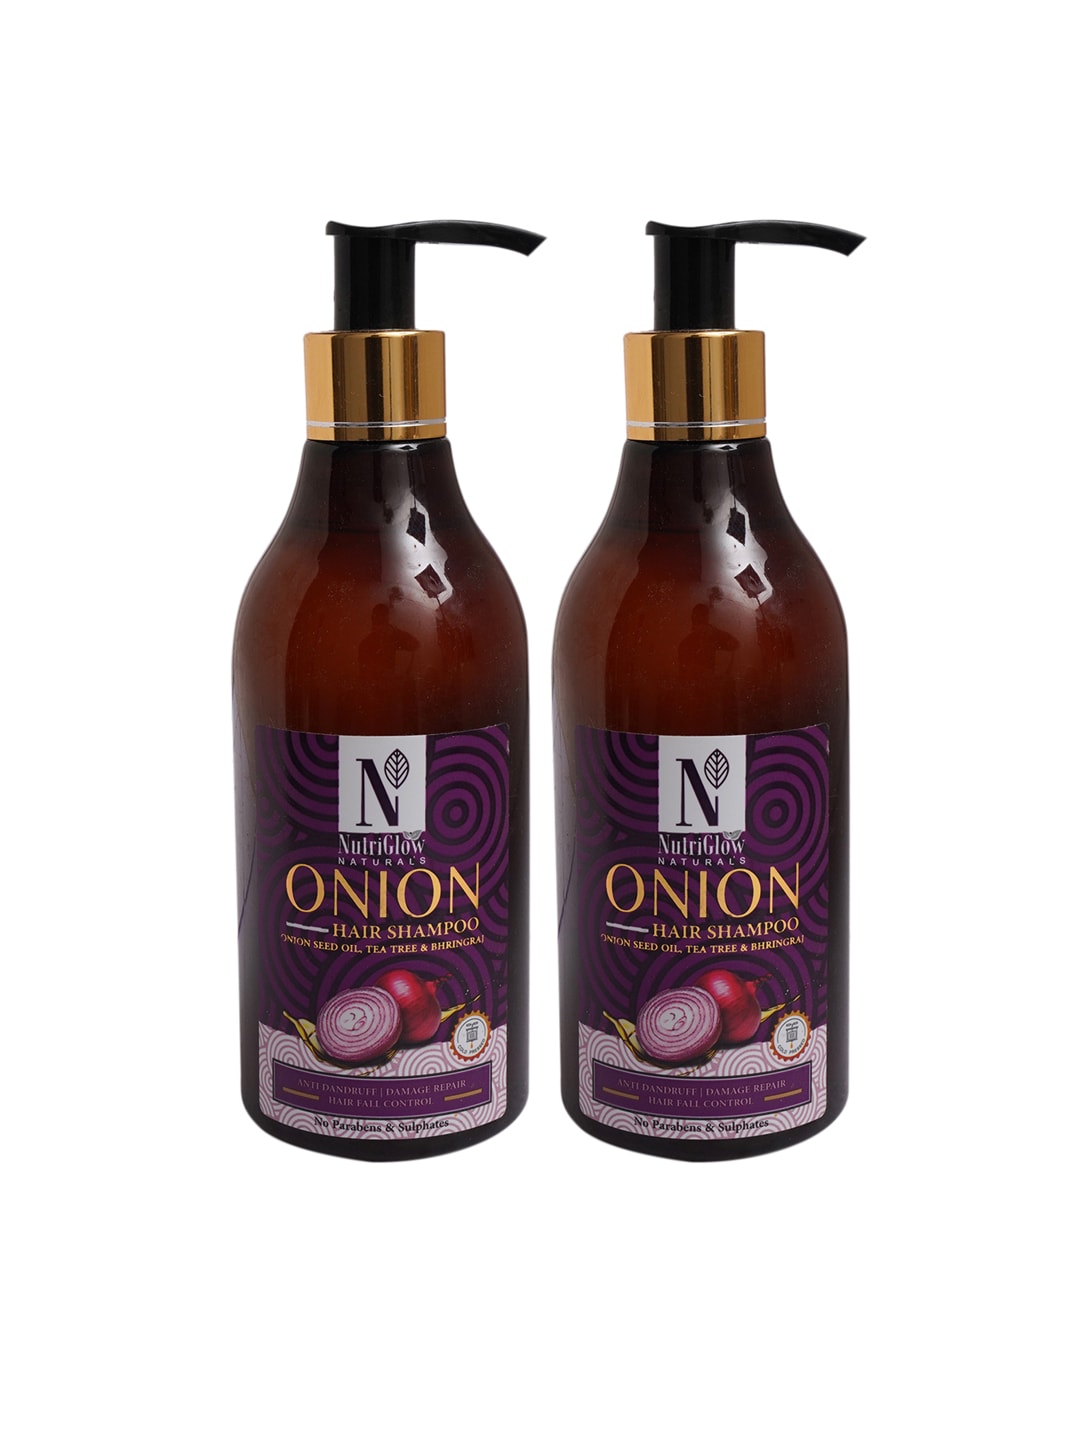 NutriGlow NATURAL's Set of 2 Onion Dry & Damage Repair Hair Shampoo 300 ml each Price in India